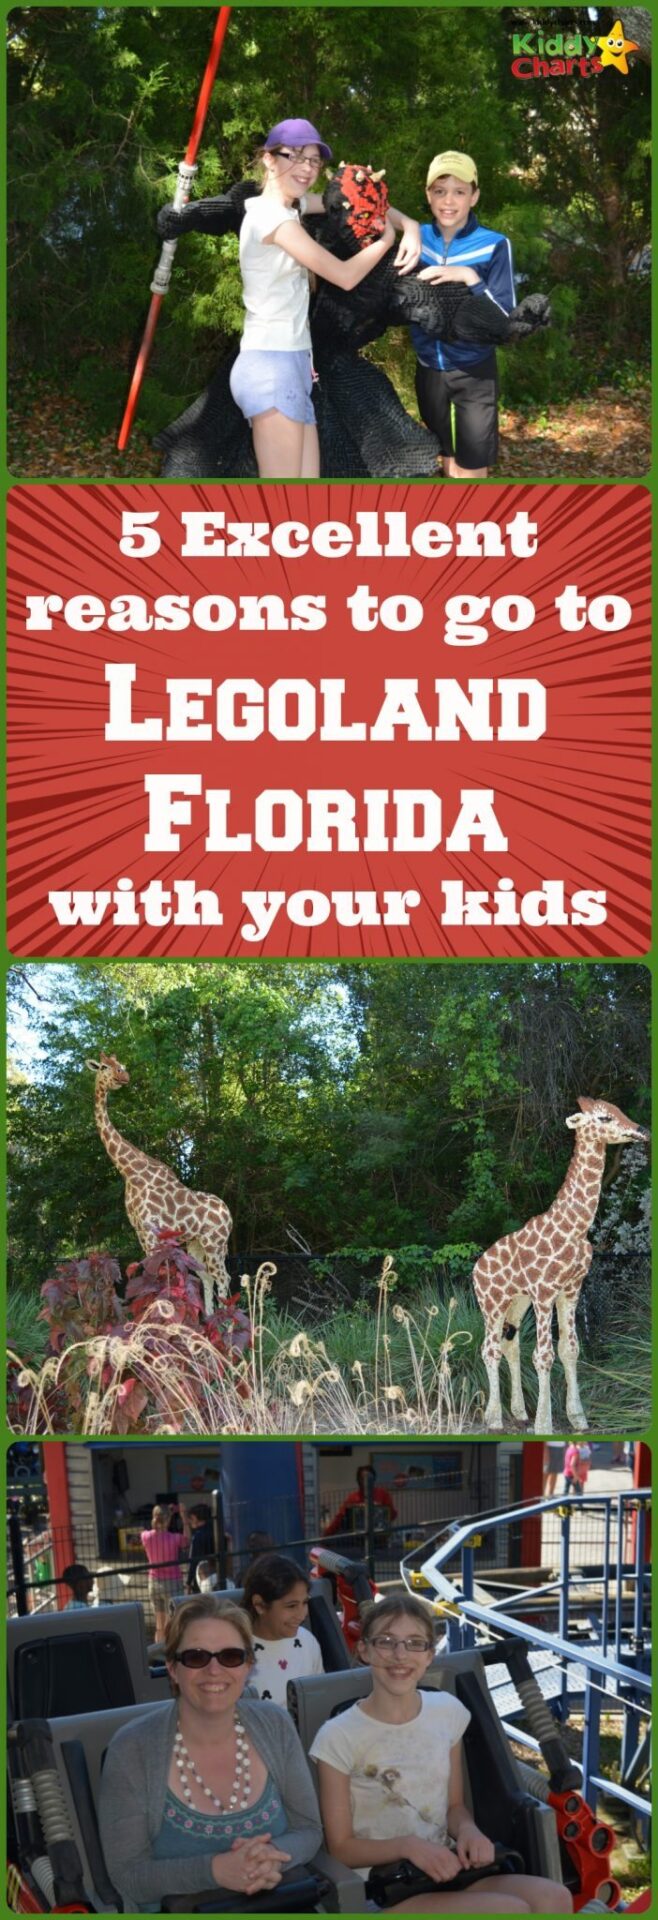 We LOVED Legoland Florida with our two children, and here are five reasons why we liked it so much. And my daughter designed this pin for you all too - she was THAT inspired by the park! ;-)